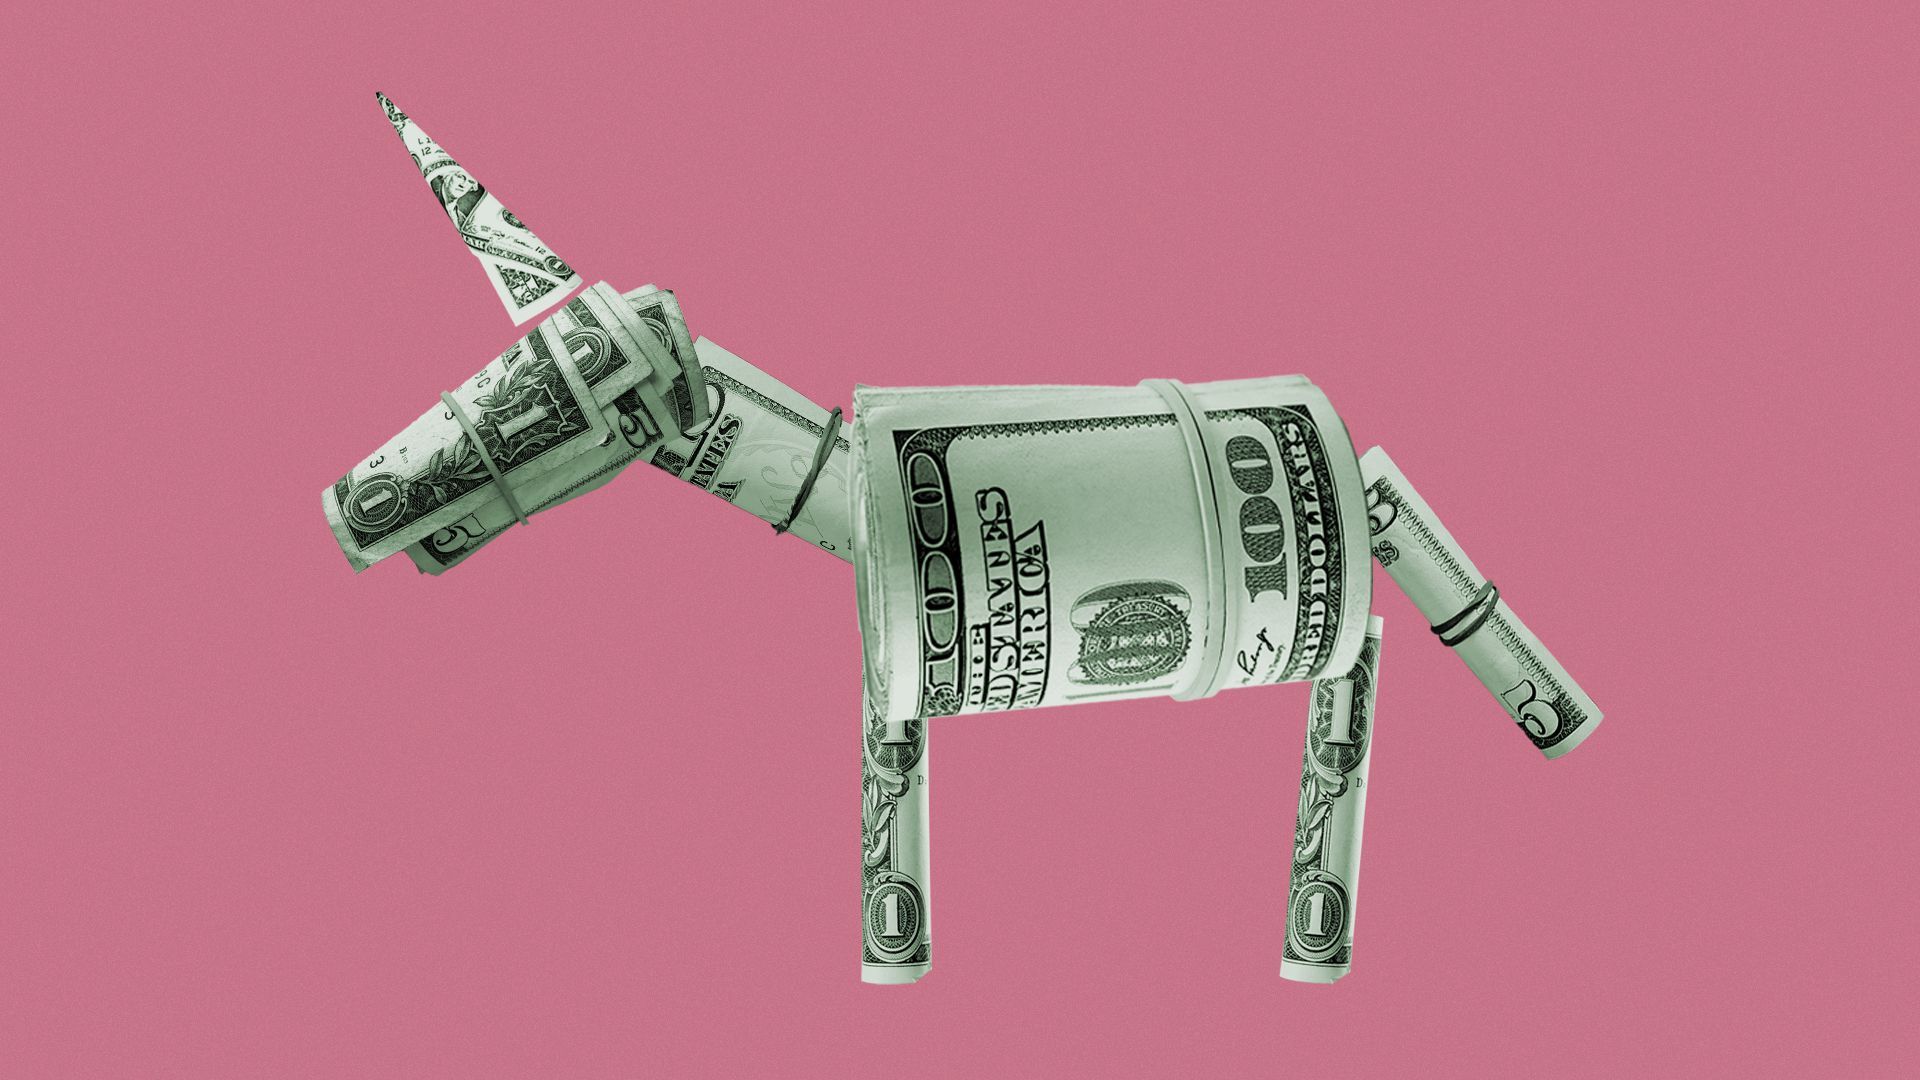 Illustration of a unicorn made from rolls of cash